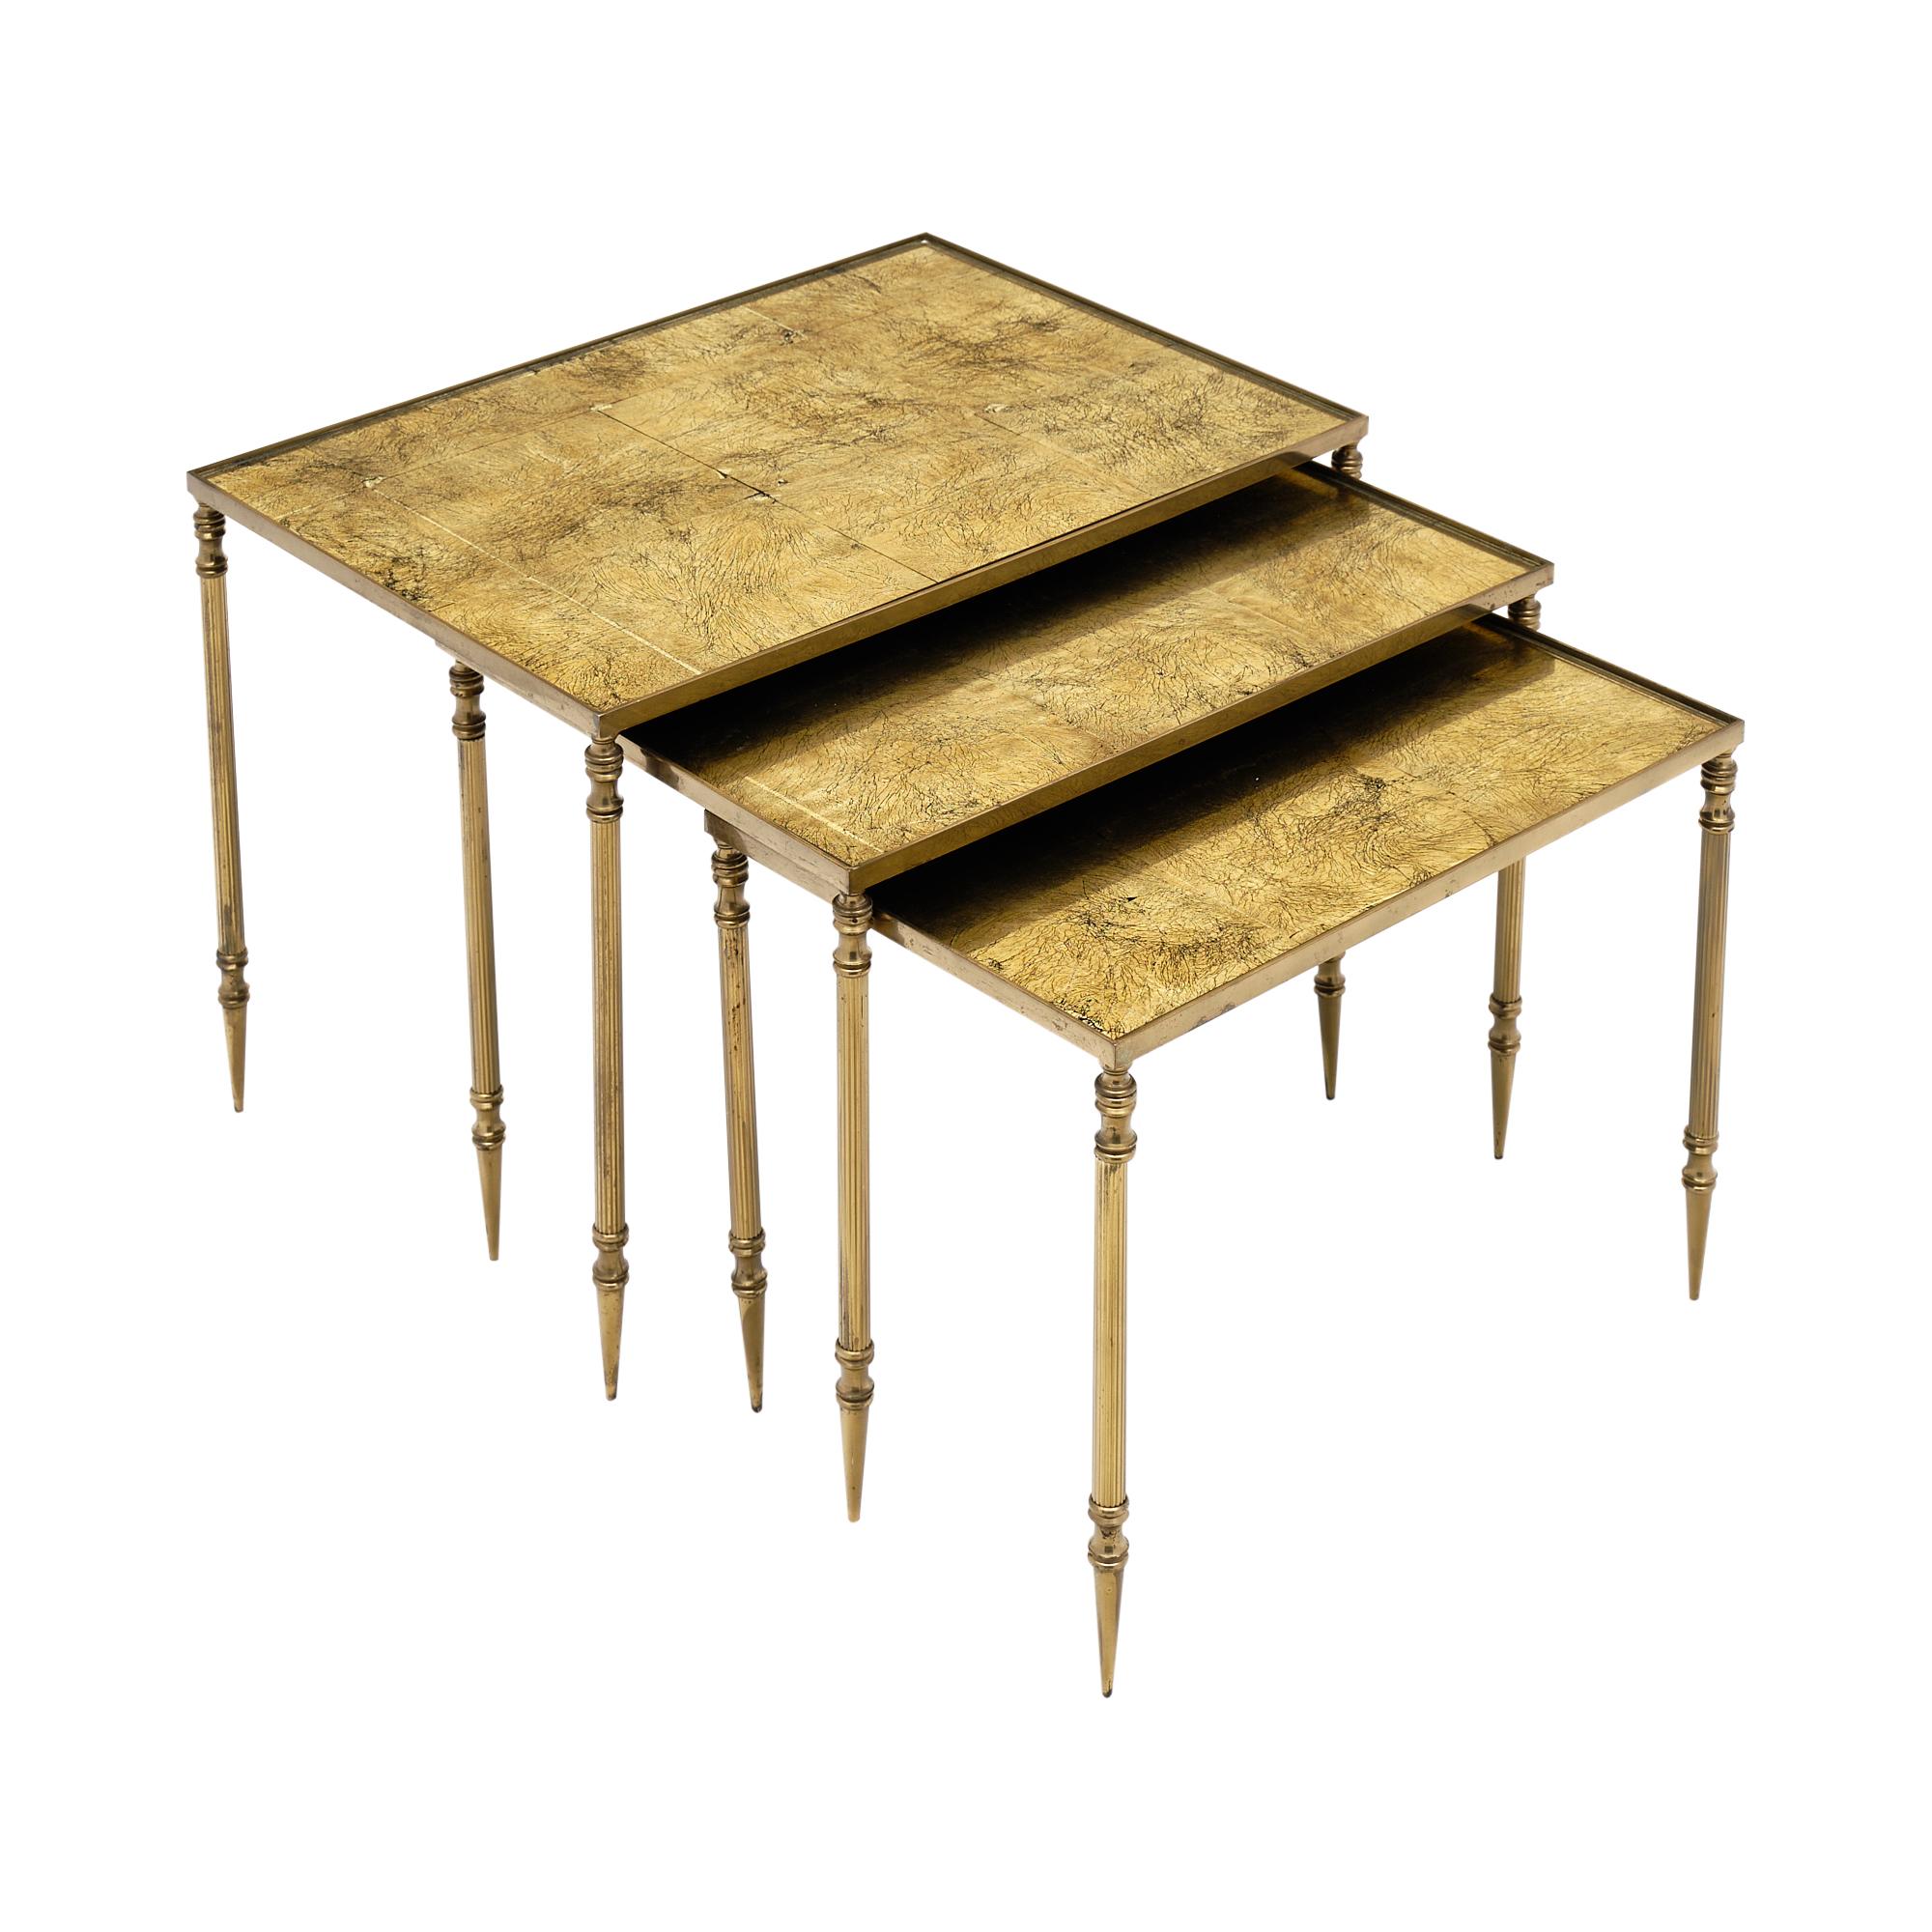 Set of three nesting tables from France made of ridged gilt brass and 24 carat gold leafed glass by Maison Baguès. 

Large table
H-15.625”
L- 21.75”
D- 15.75”.

Medium table
H- 14.5”
L- 19.625”
D- 13.875”

Small table
H- 13.375”
L-